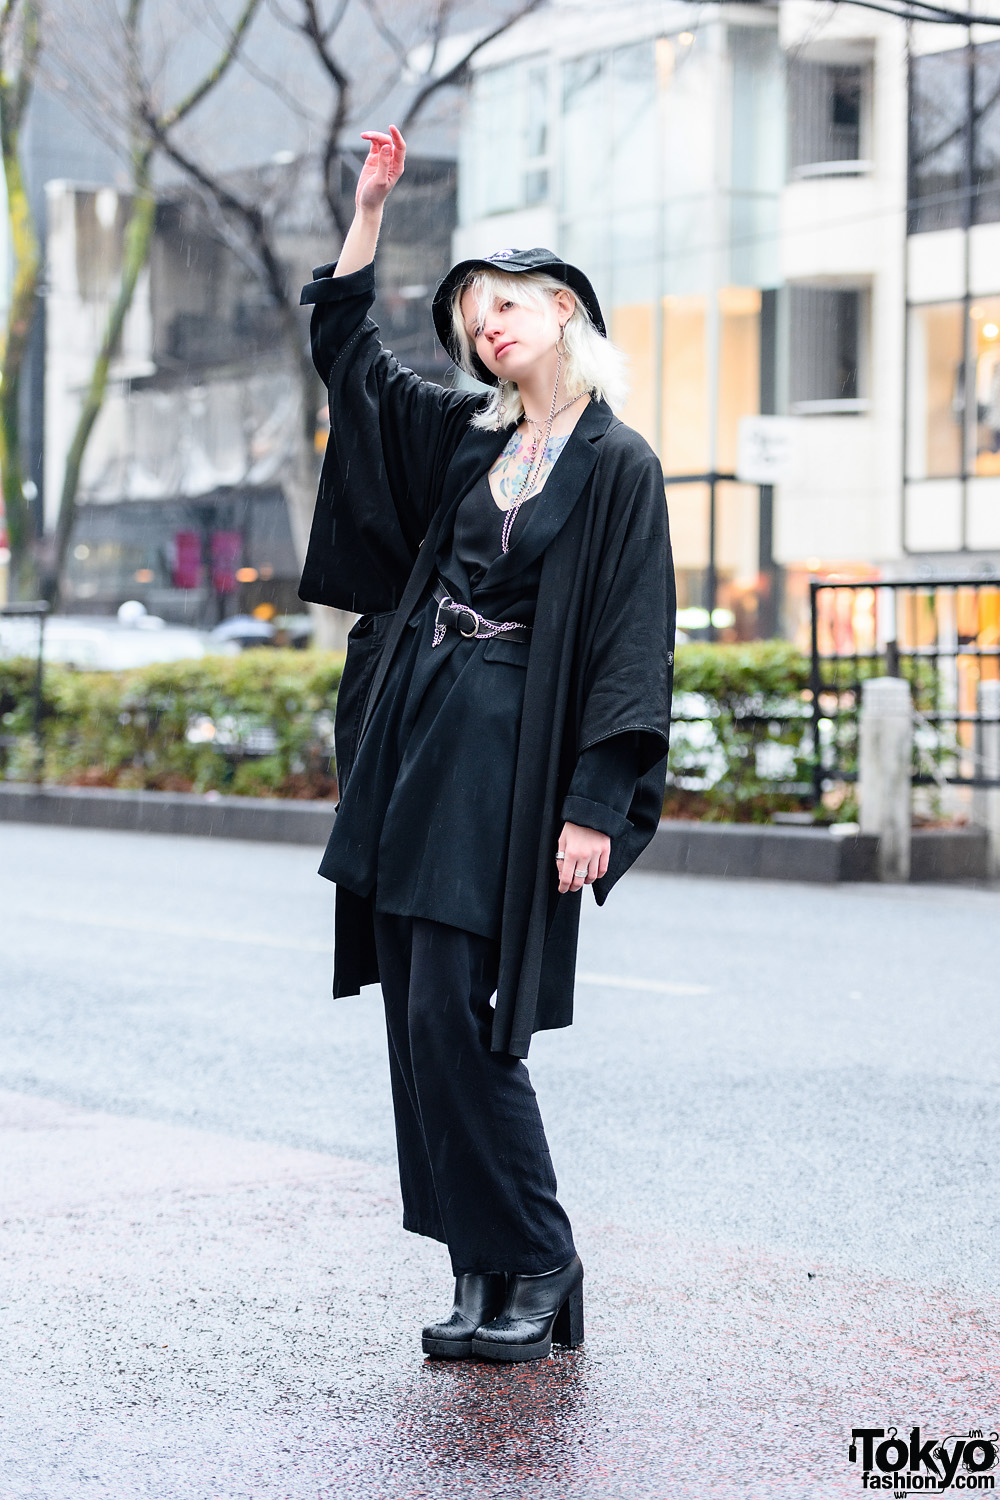 Russian Fashion Model’s Chic All Black Tokyo Style w/ Chest Tattoos ...